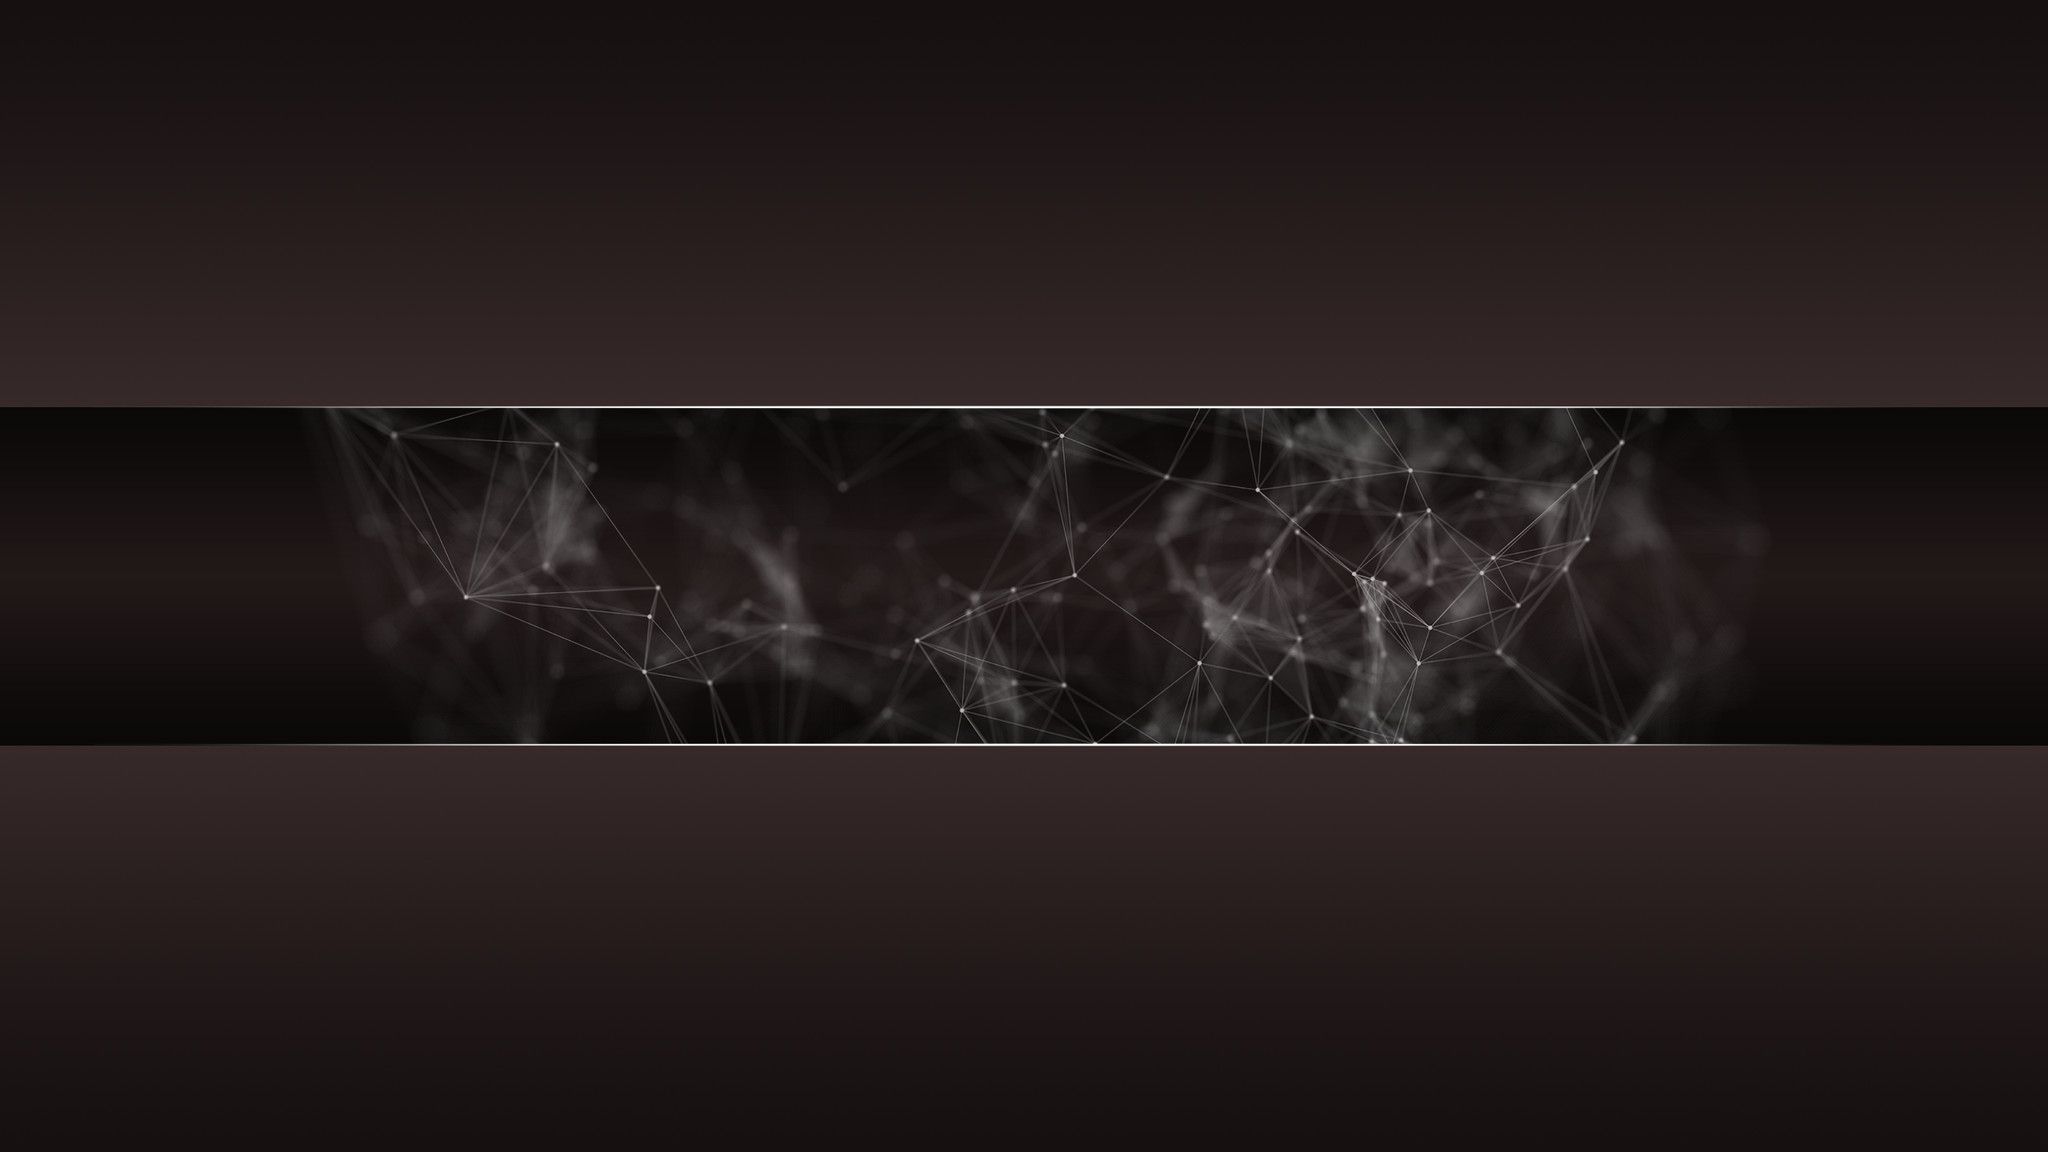 youtube banner template 2048 x 1152